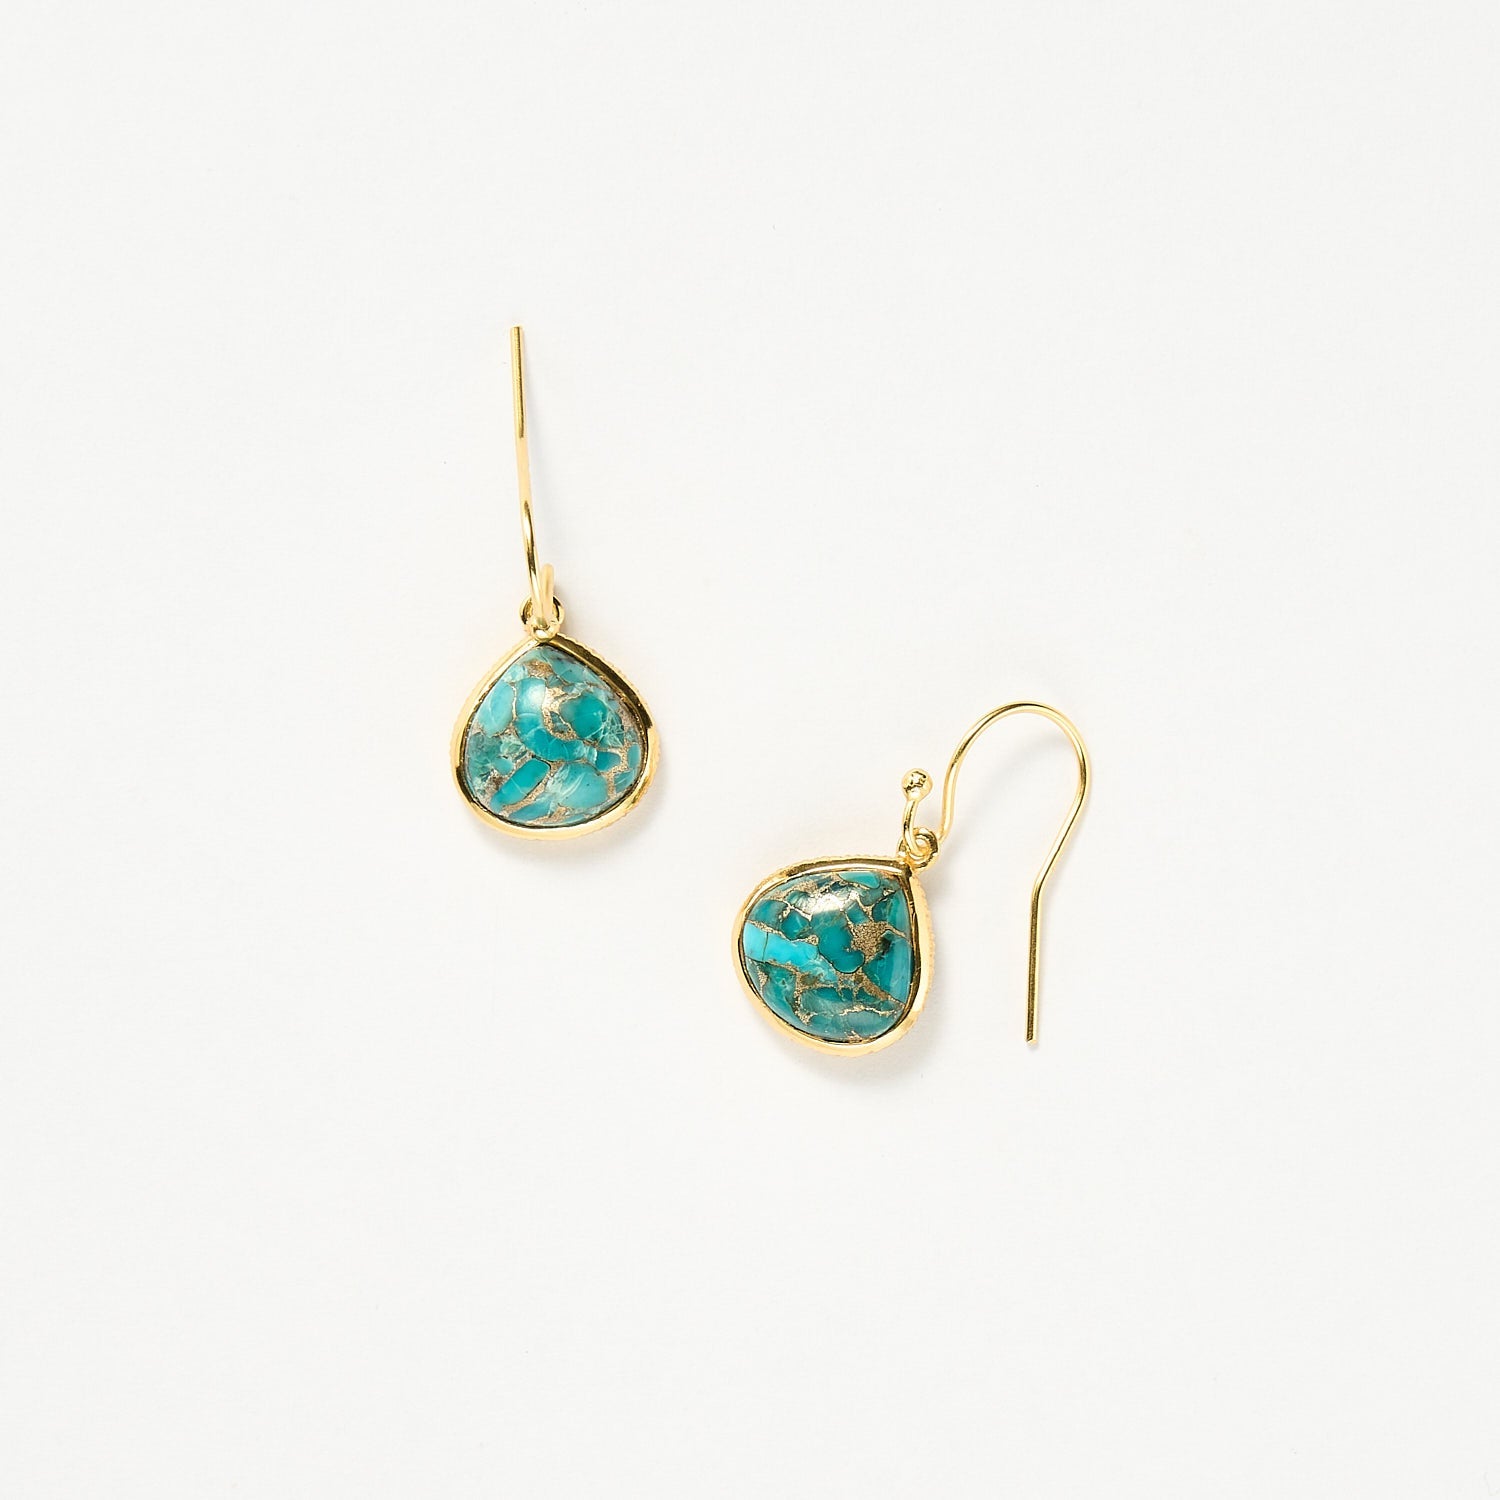 Maldives earrings - Turquoise, Gold 